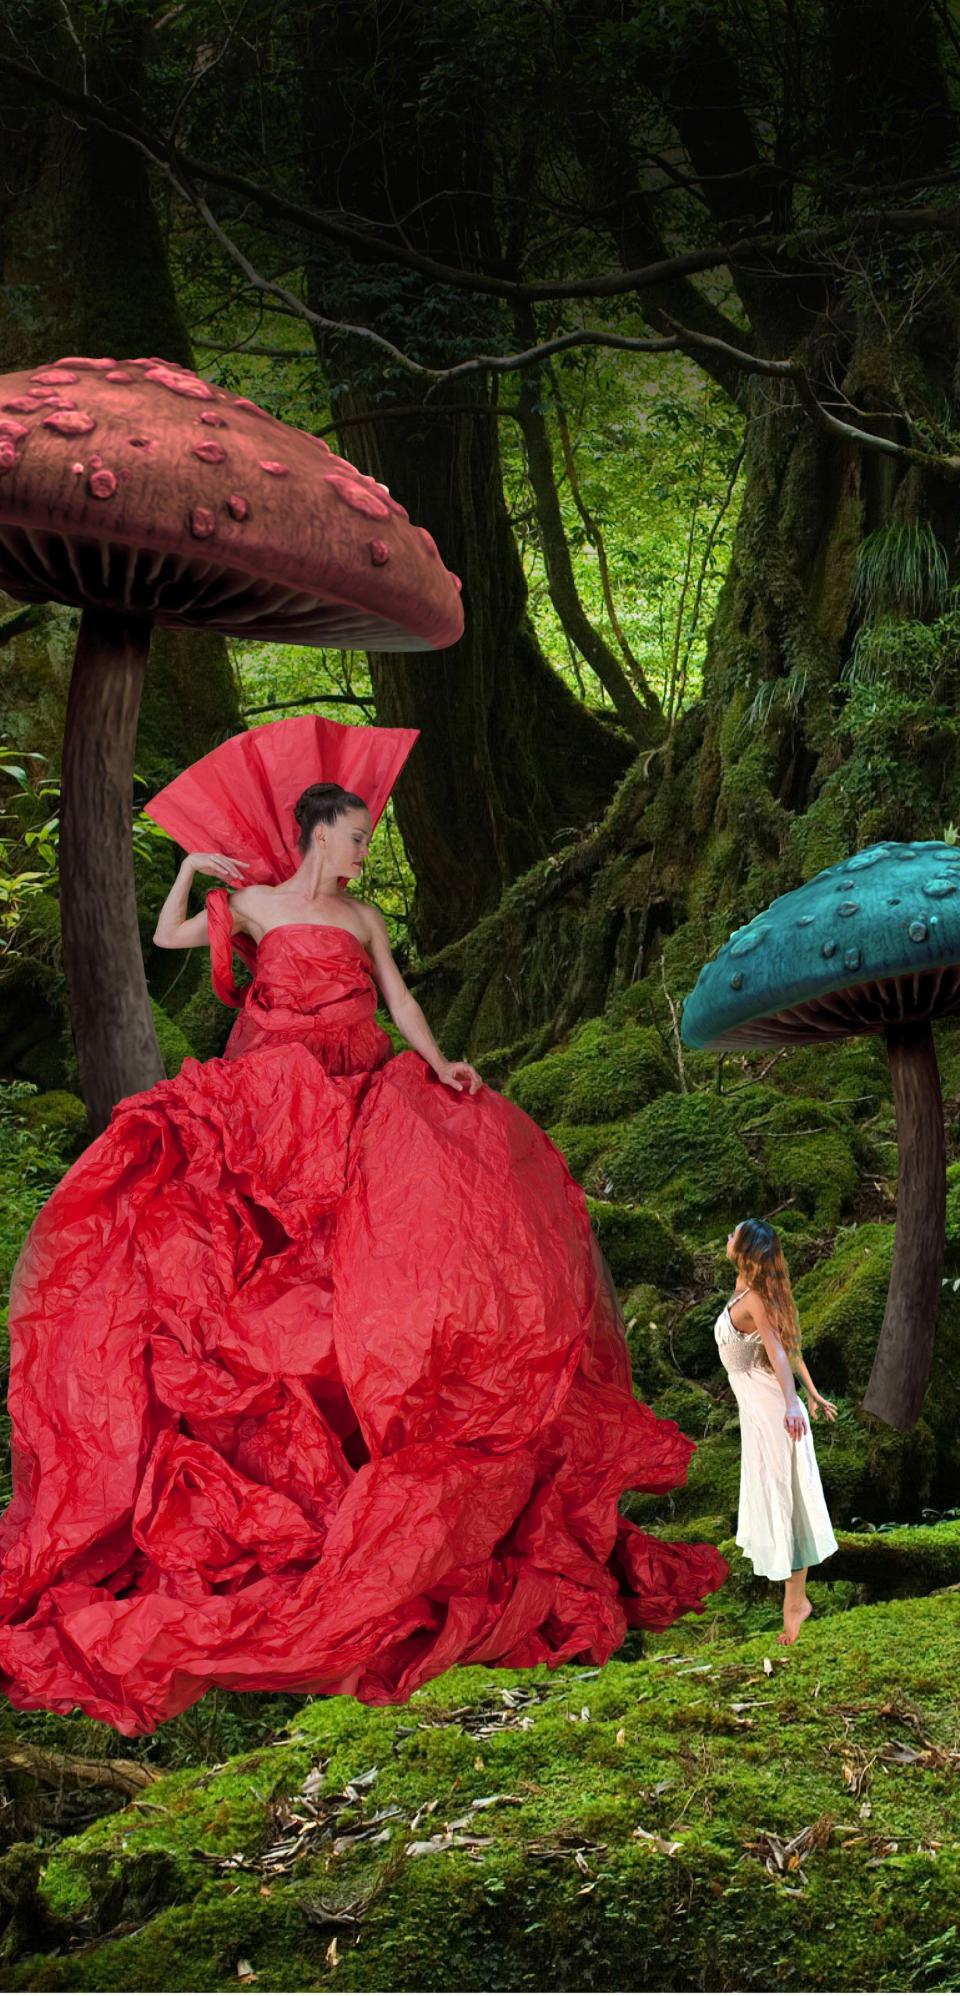 Alice meets the Queen of Hearts in MOMIX's "Alice," playing May 29 at Music Hall Detroit.